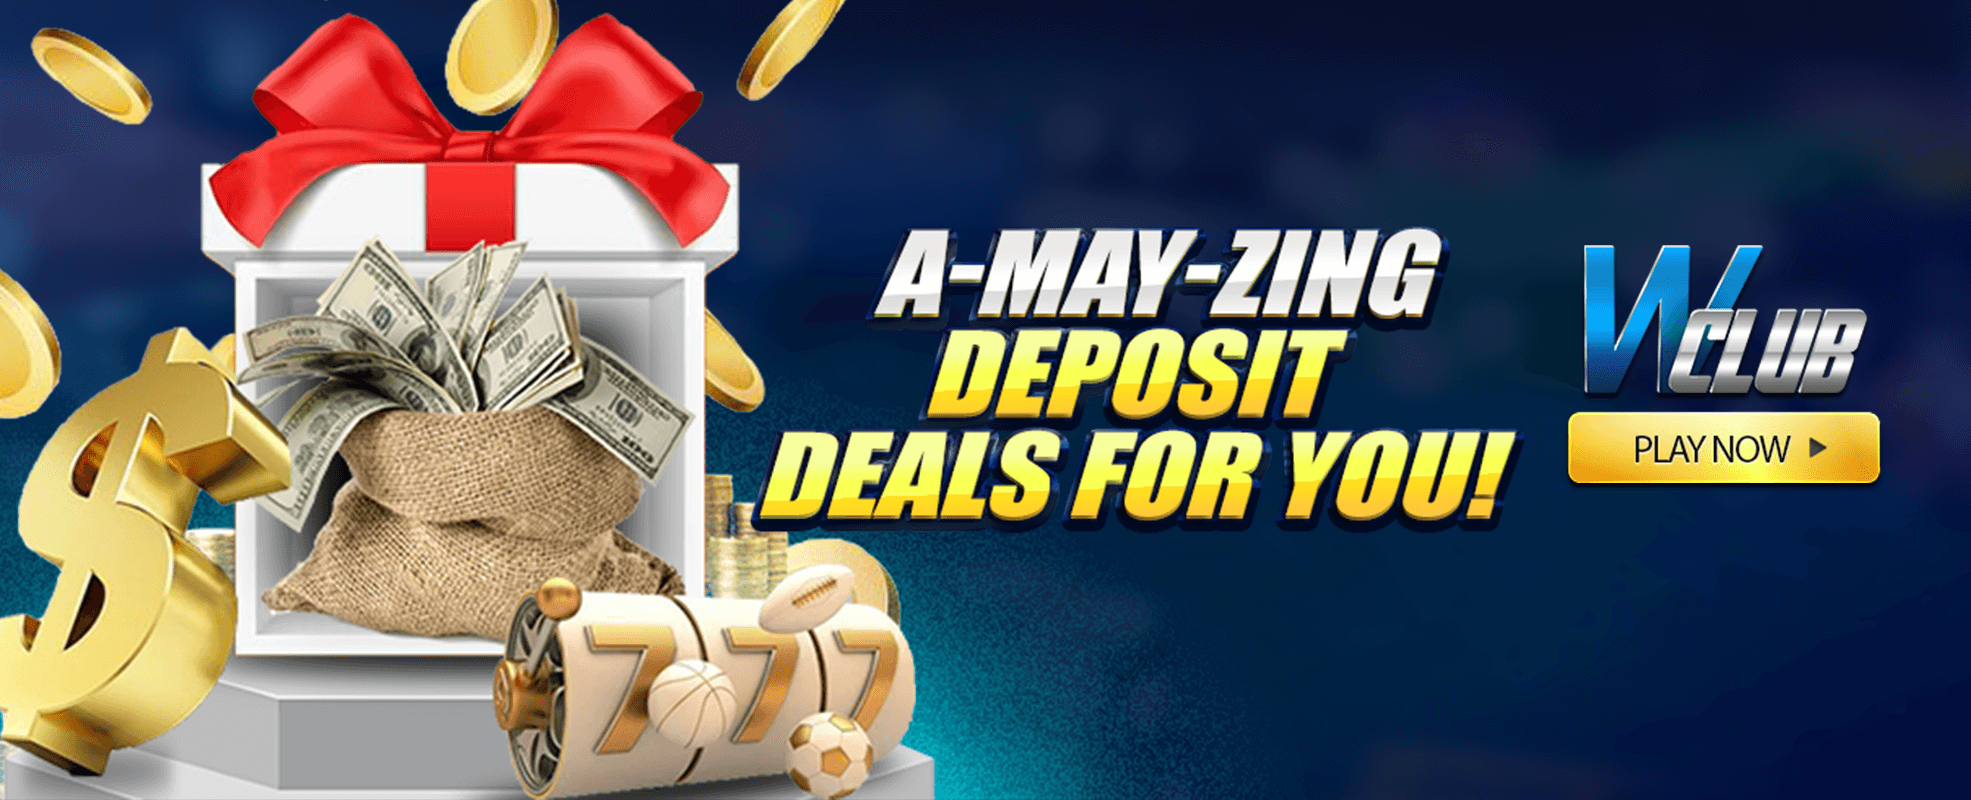 A-May-Zing Deposit Deals For You!